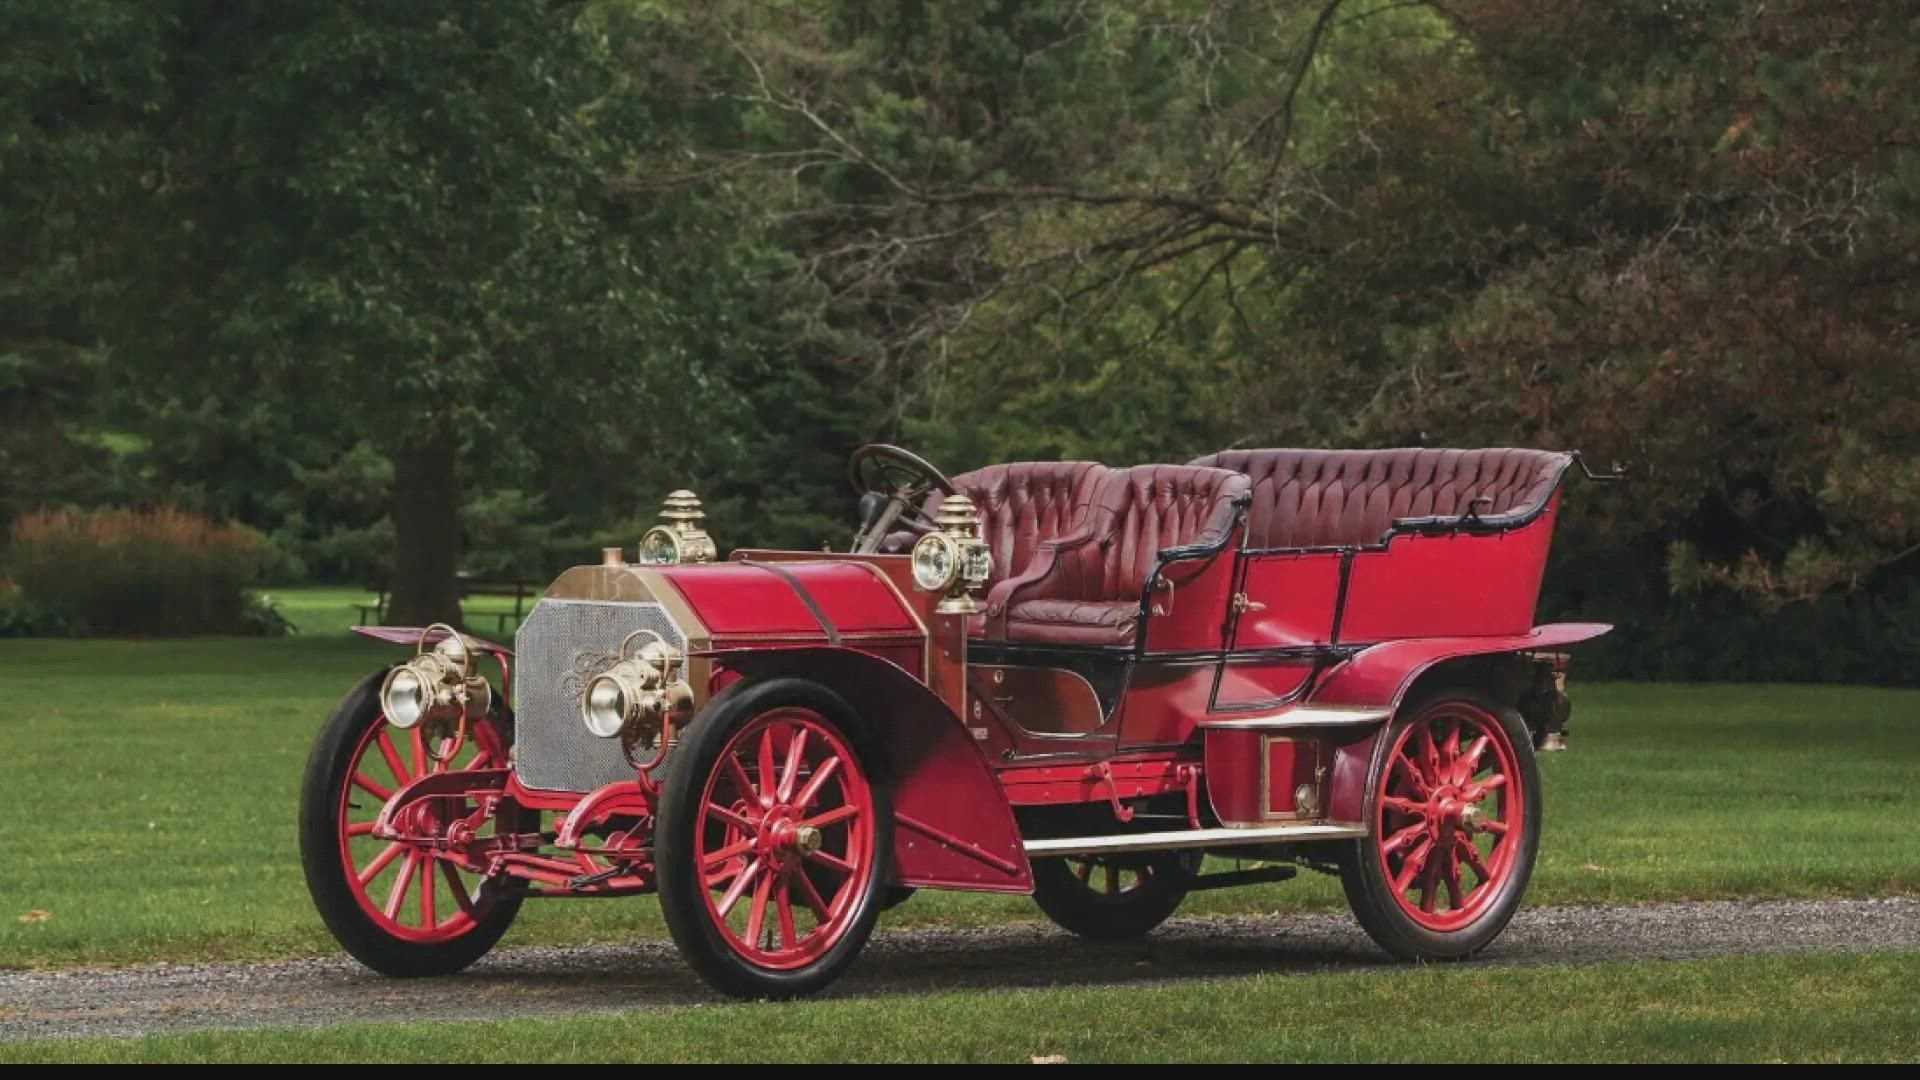 A historic automobile has made its way back to Grant’s Farm. You can visit the antique car that was once owned by Augusta Busch, Sr.